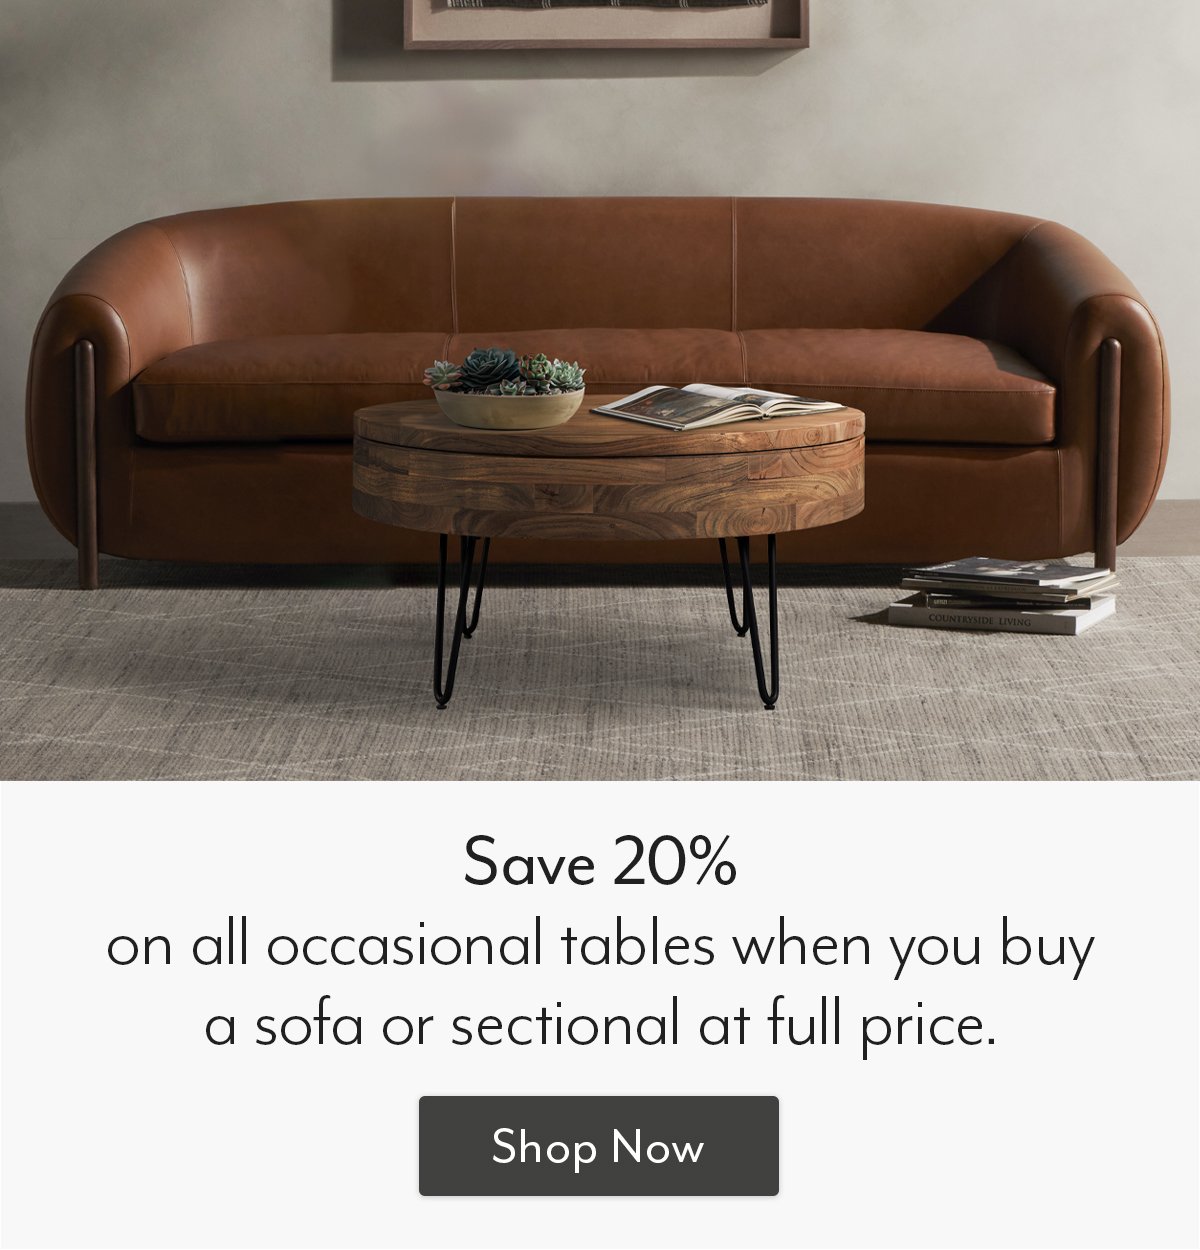 Save 20% on occasional tables when you buy a sofa/sectional at full price!